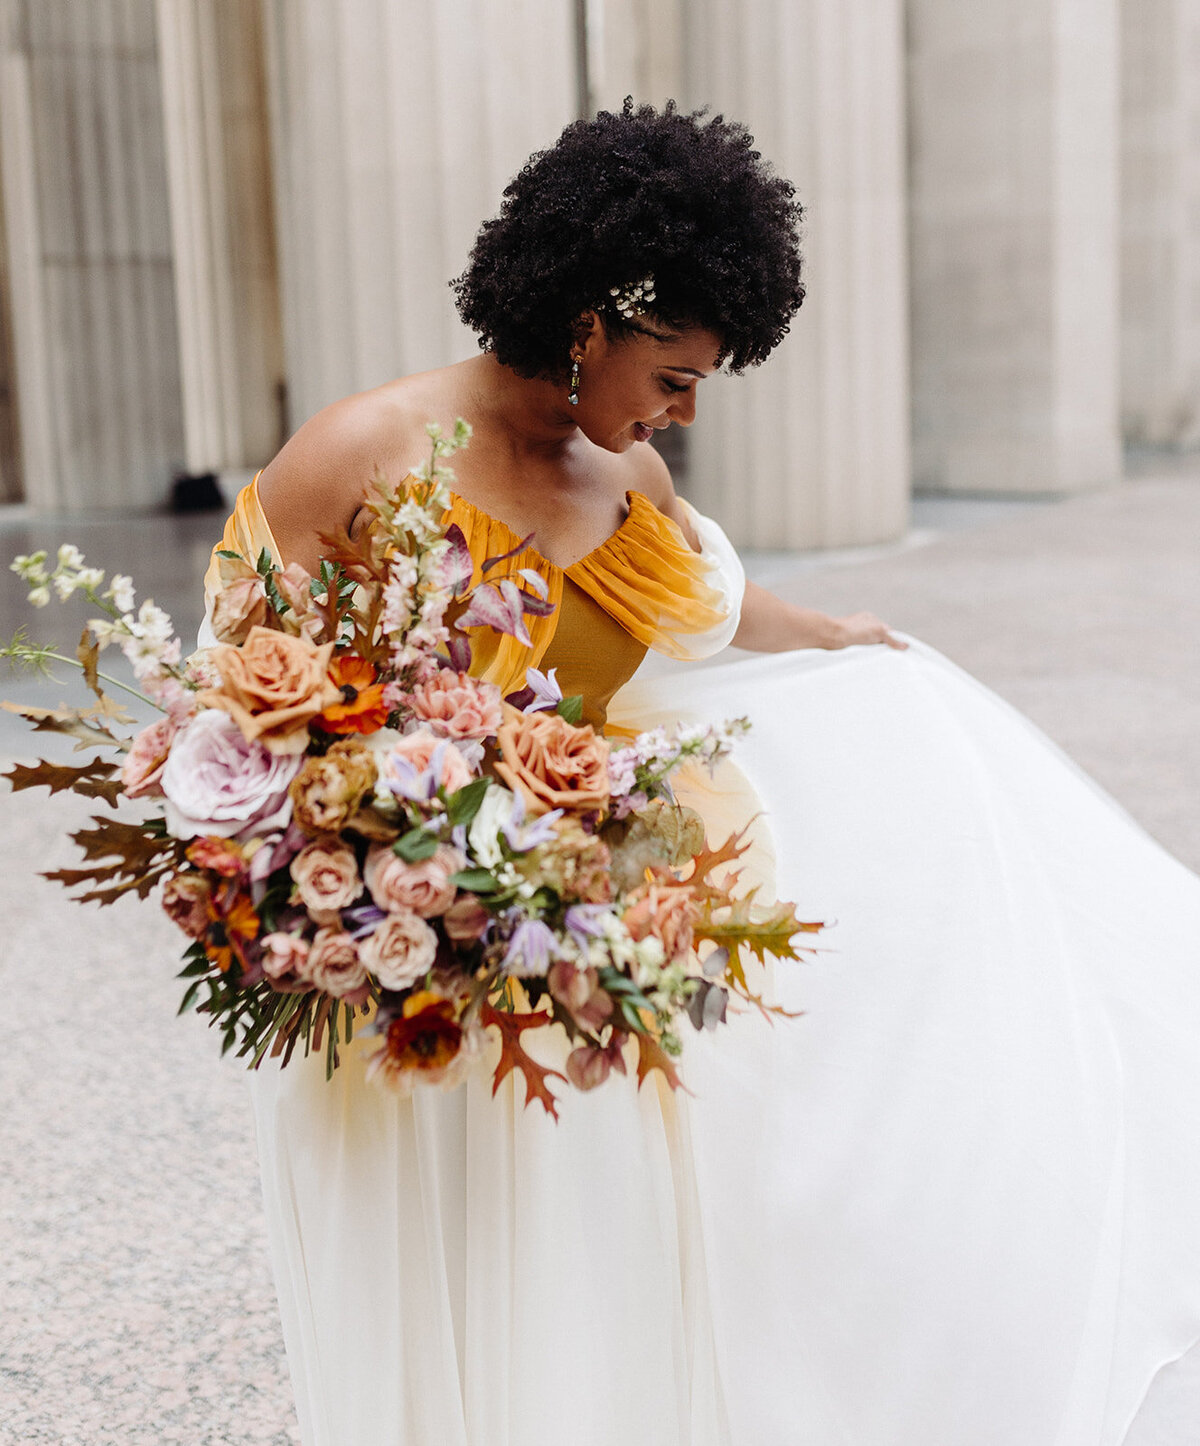 Beautiful autumnal bridal bouquet composed of roses, ranunculus, delphinium, clematis, lisianthus, and fall foliage floral hues of burnt orange, mauve, dusty rose, taupe, and lavender. Design by Rosemary and Finch in Nashville, TN.